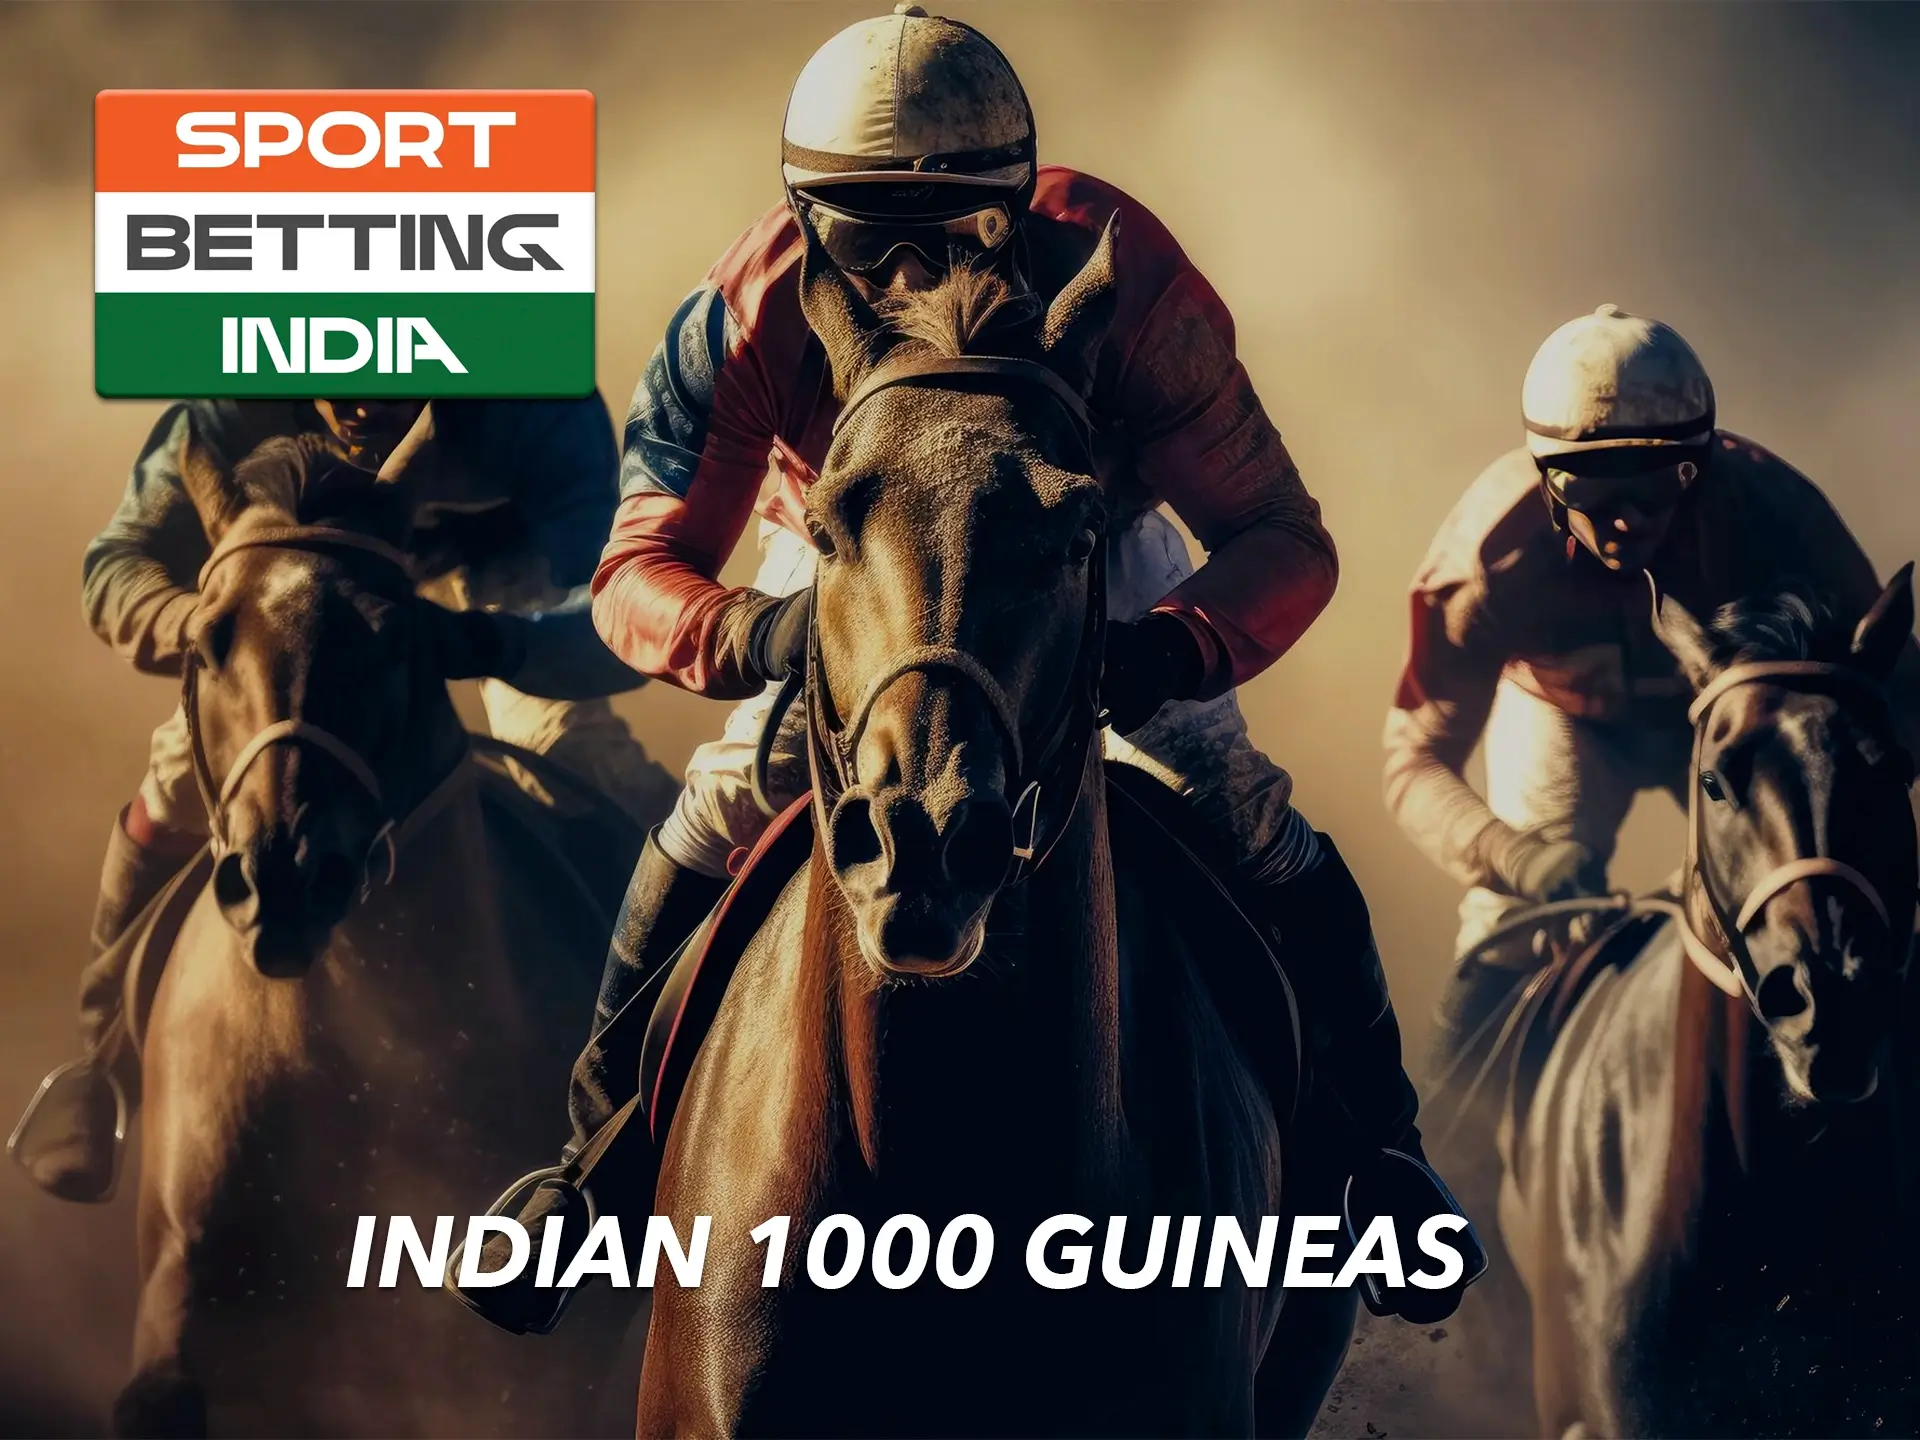 Use your focus and luck when betting on the Guineas tournament.